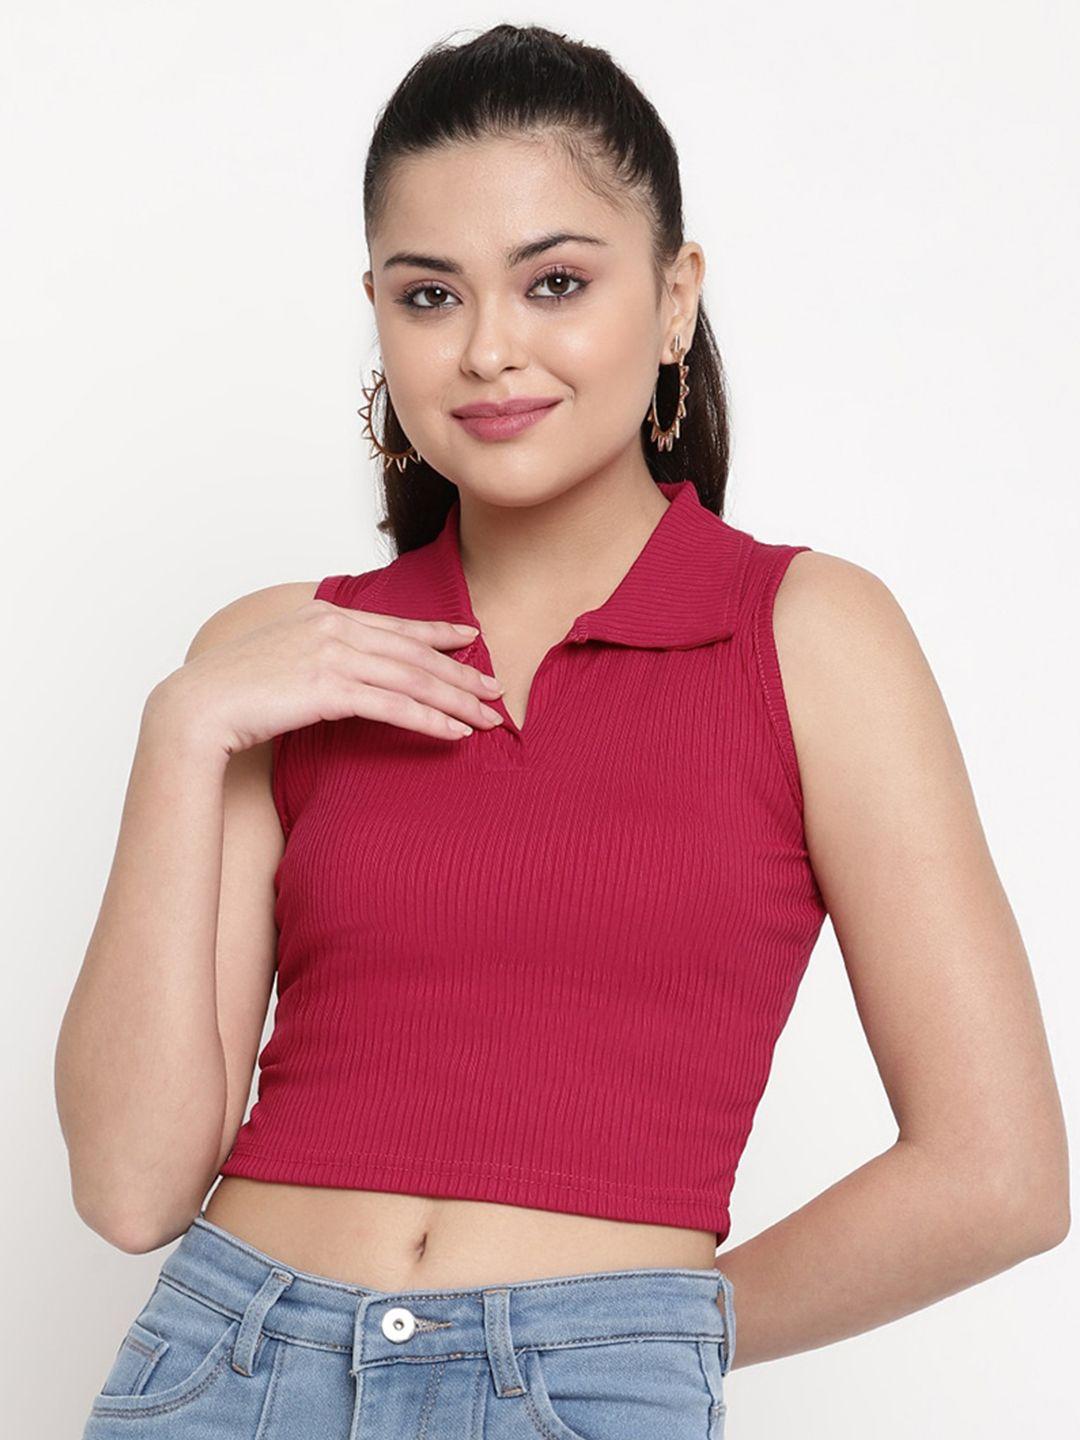 baesd collared neck sleeveless ribbed  shirt style crop top